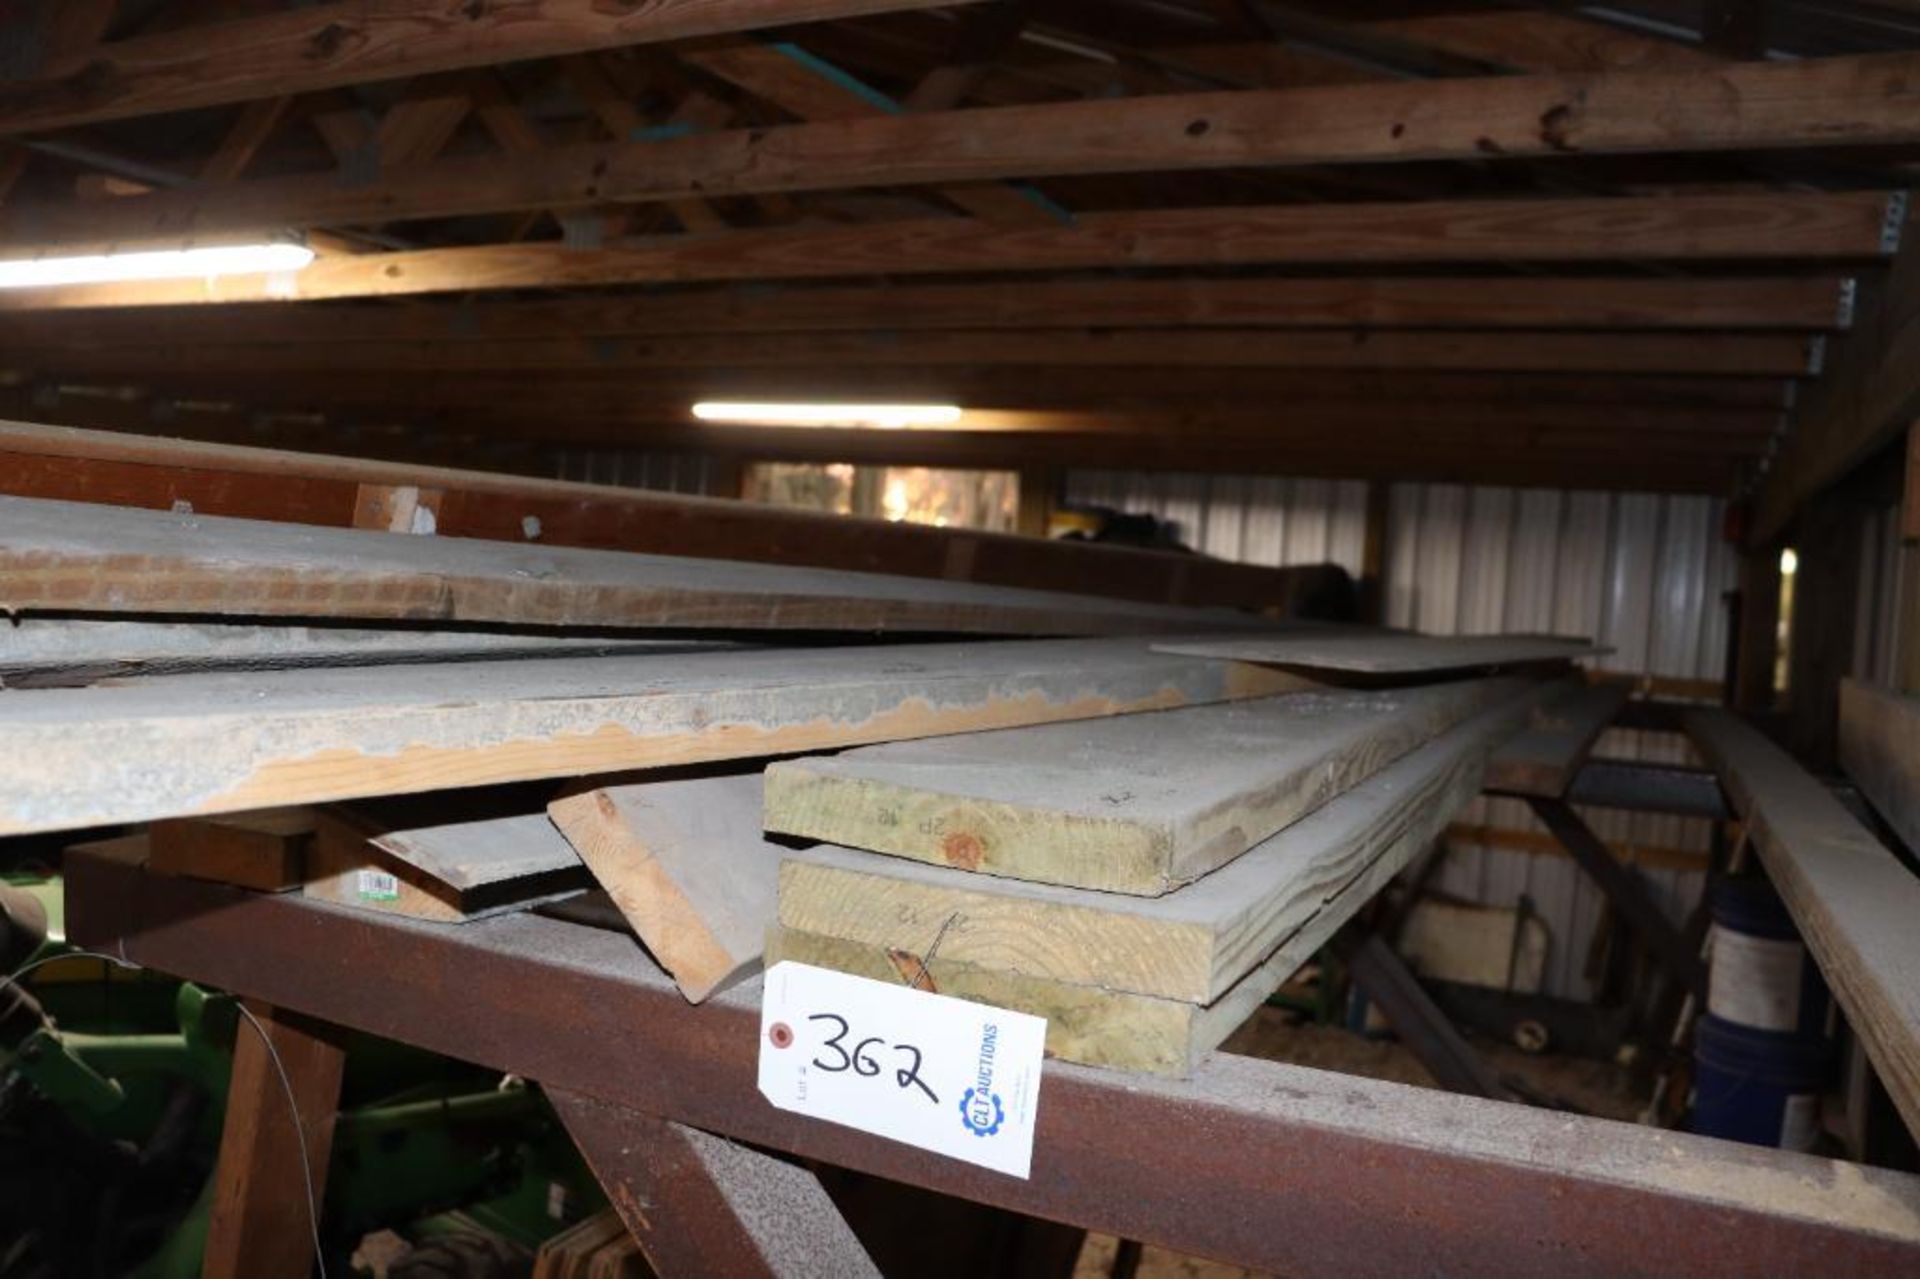 Lumber rack contents - Image 14 of 24